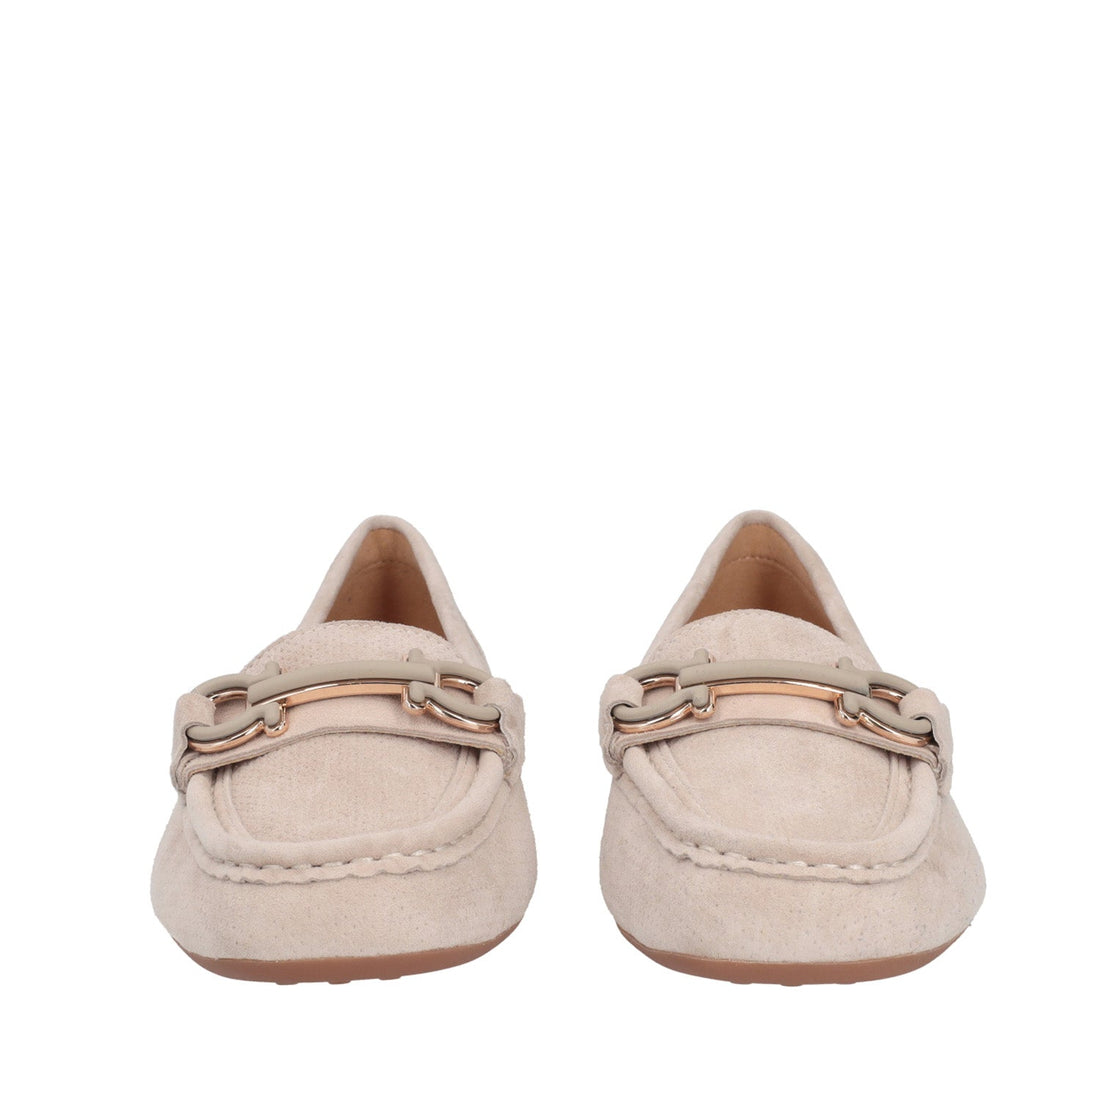 BEIGE CARMEN MOCCASIN IN PERFORATED LEATHER